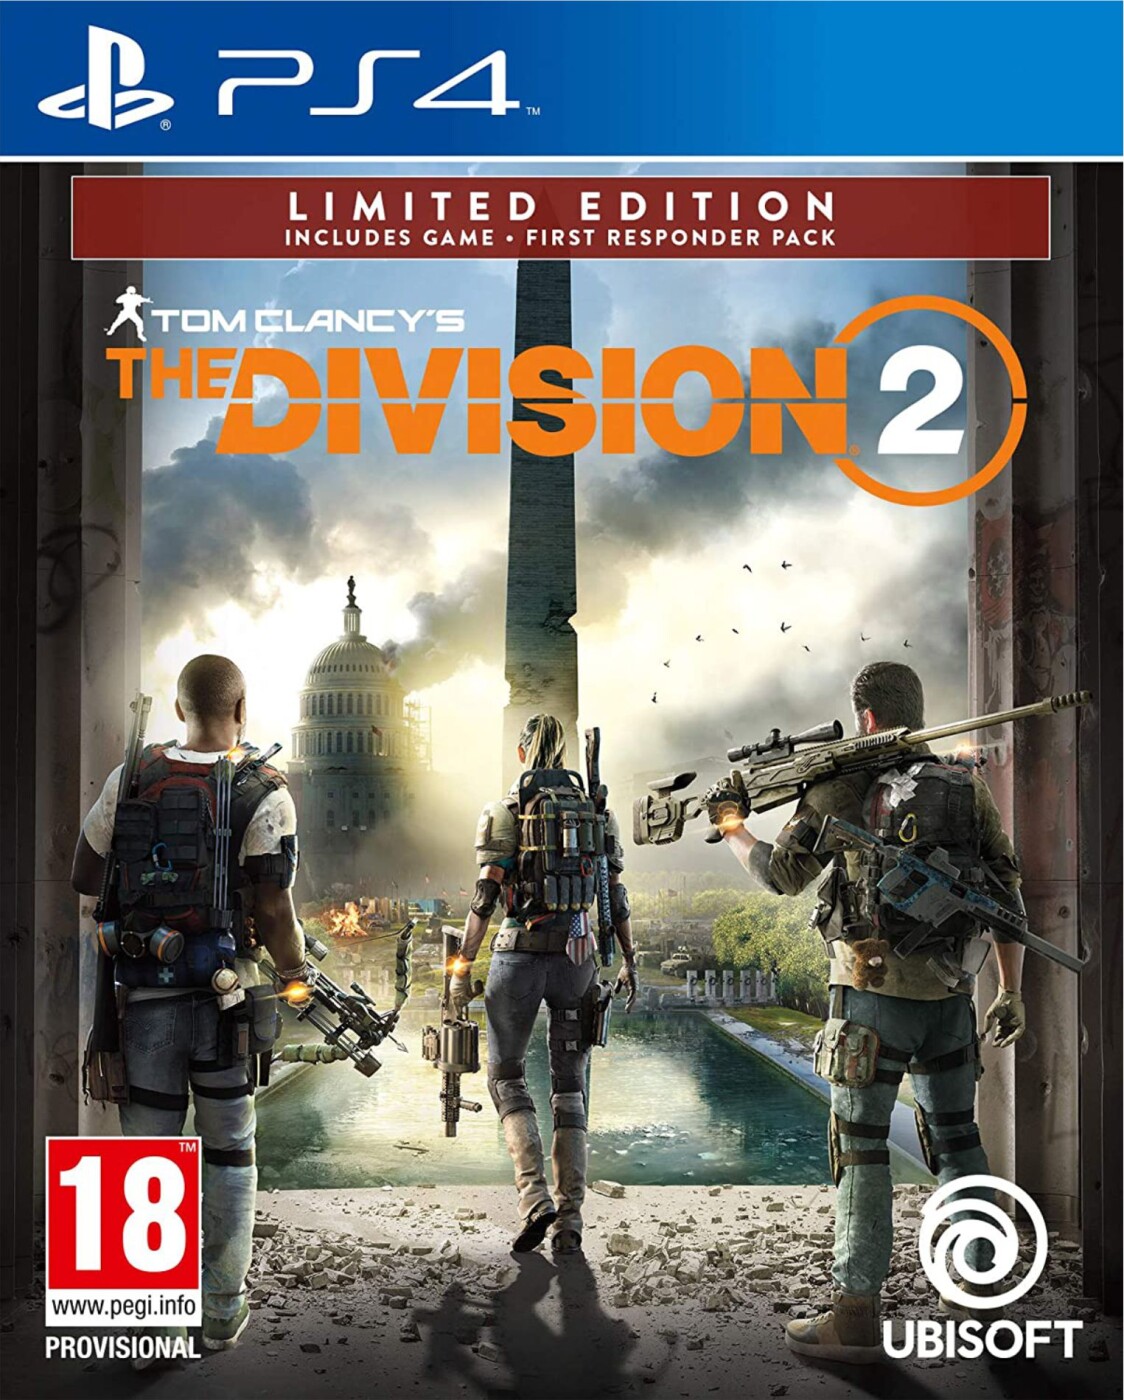 Se The Division 2 (limited Edition) - PS4 hos Gucca.dk